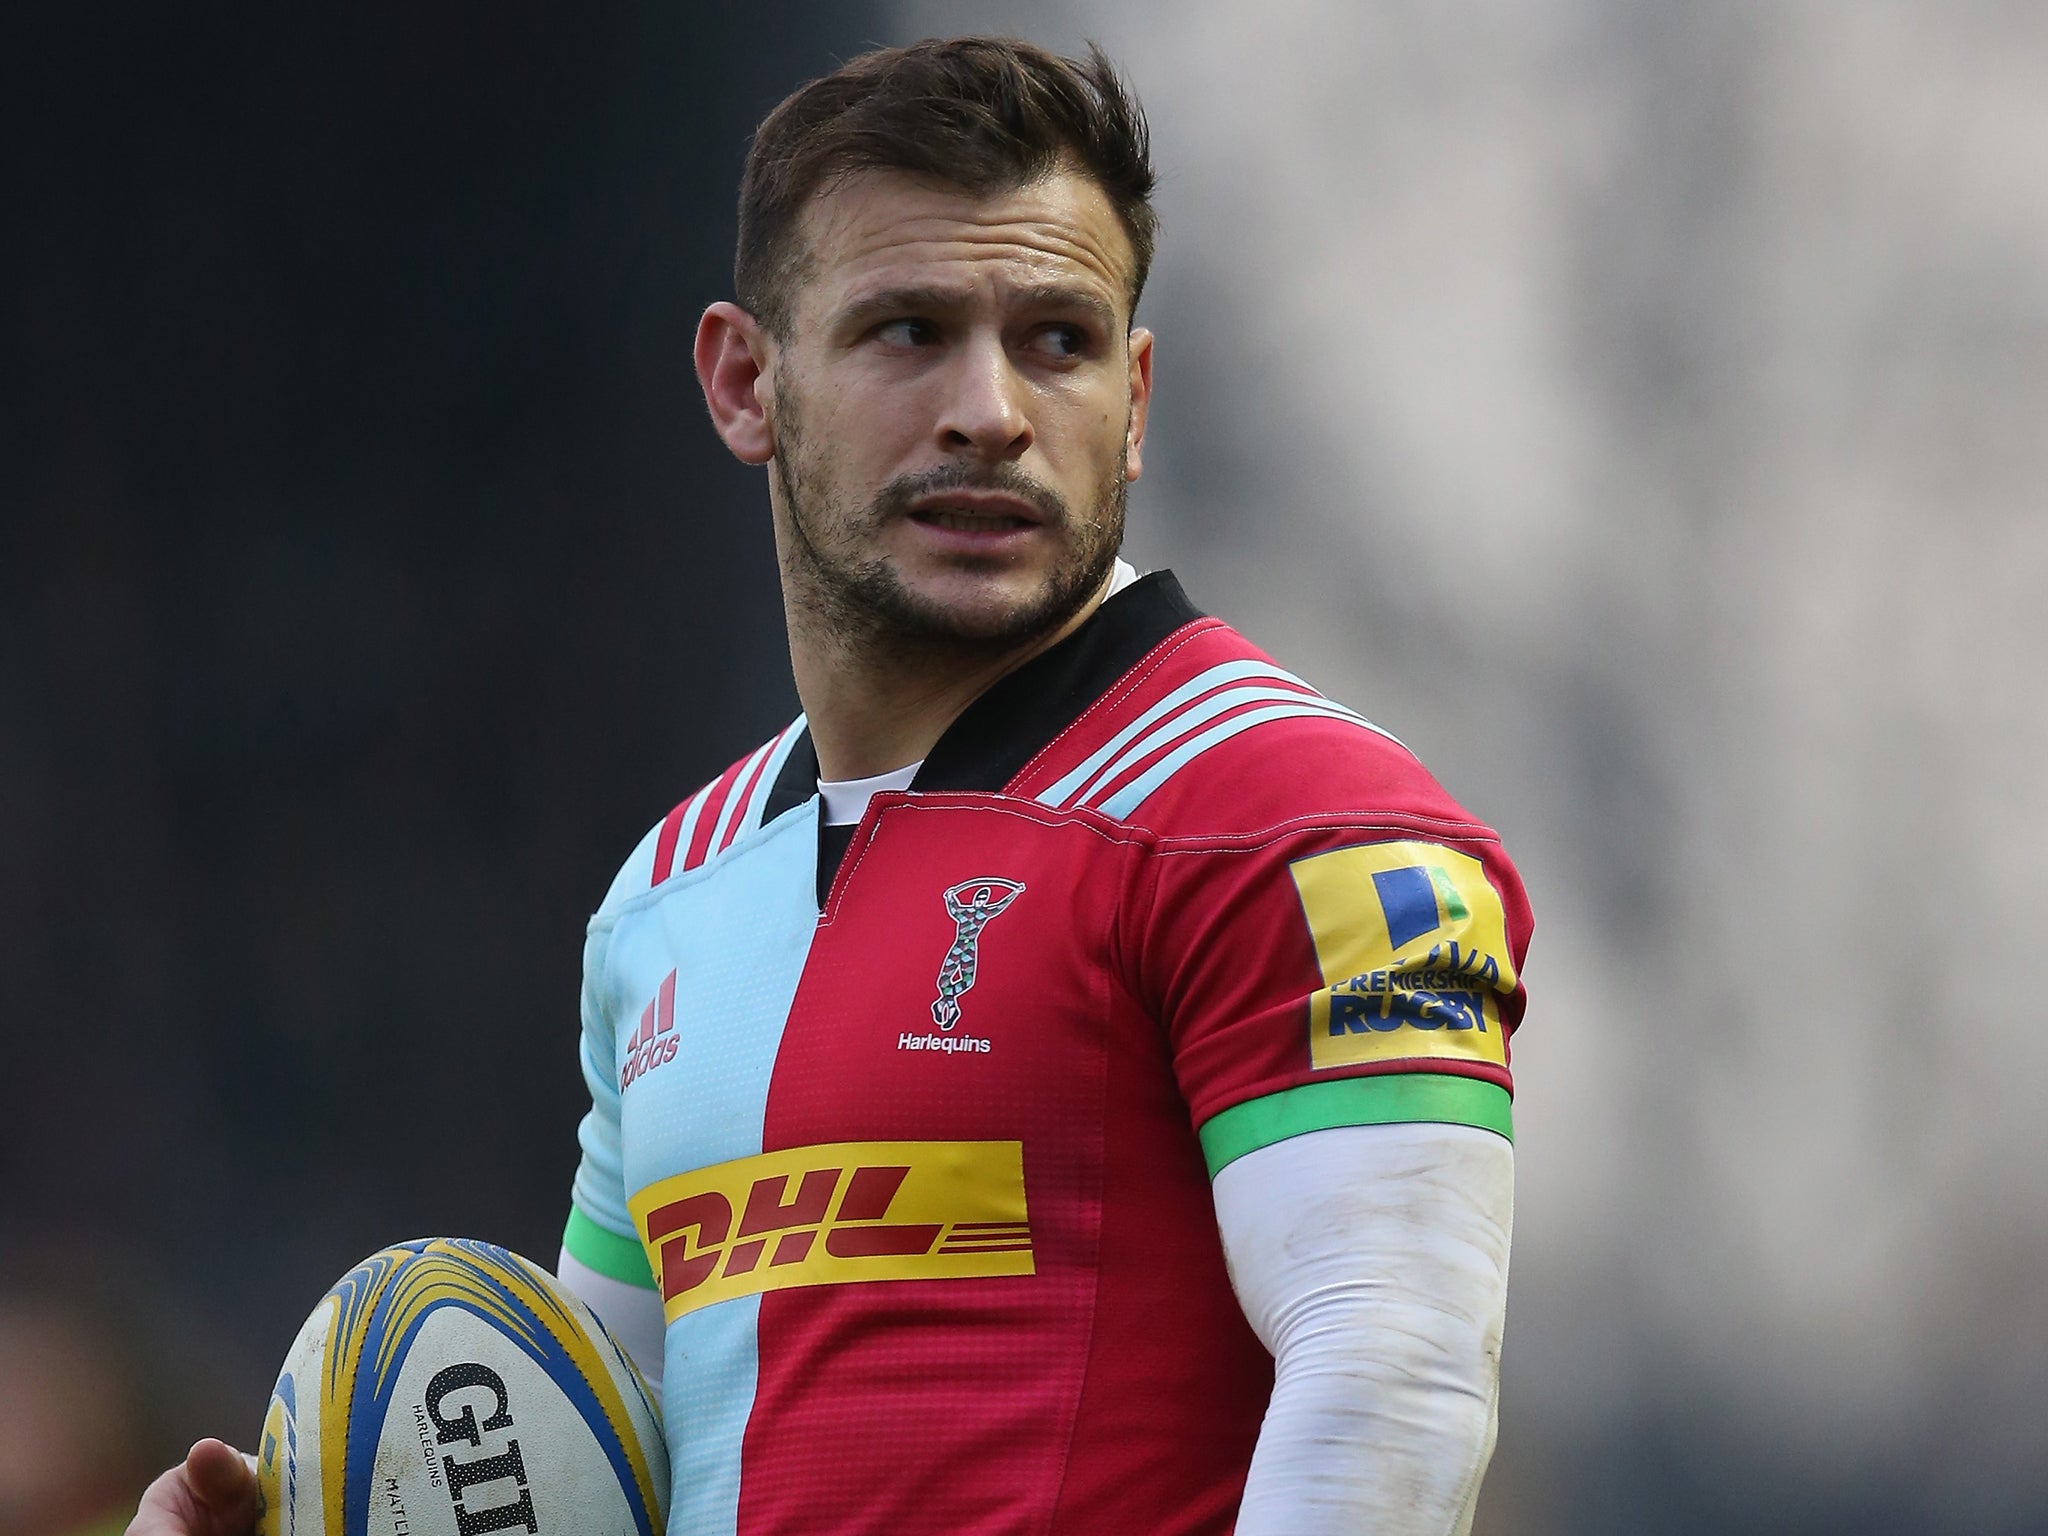 Danny Care will start his testimonial year with Harlequins in January